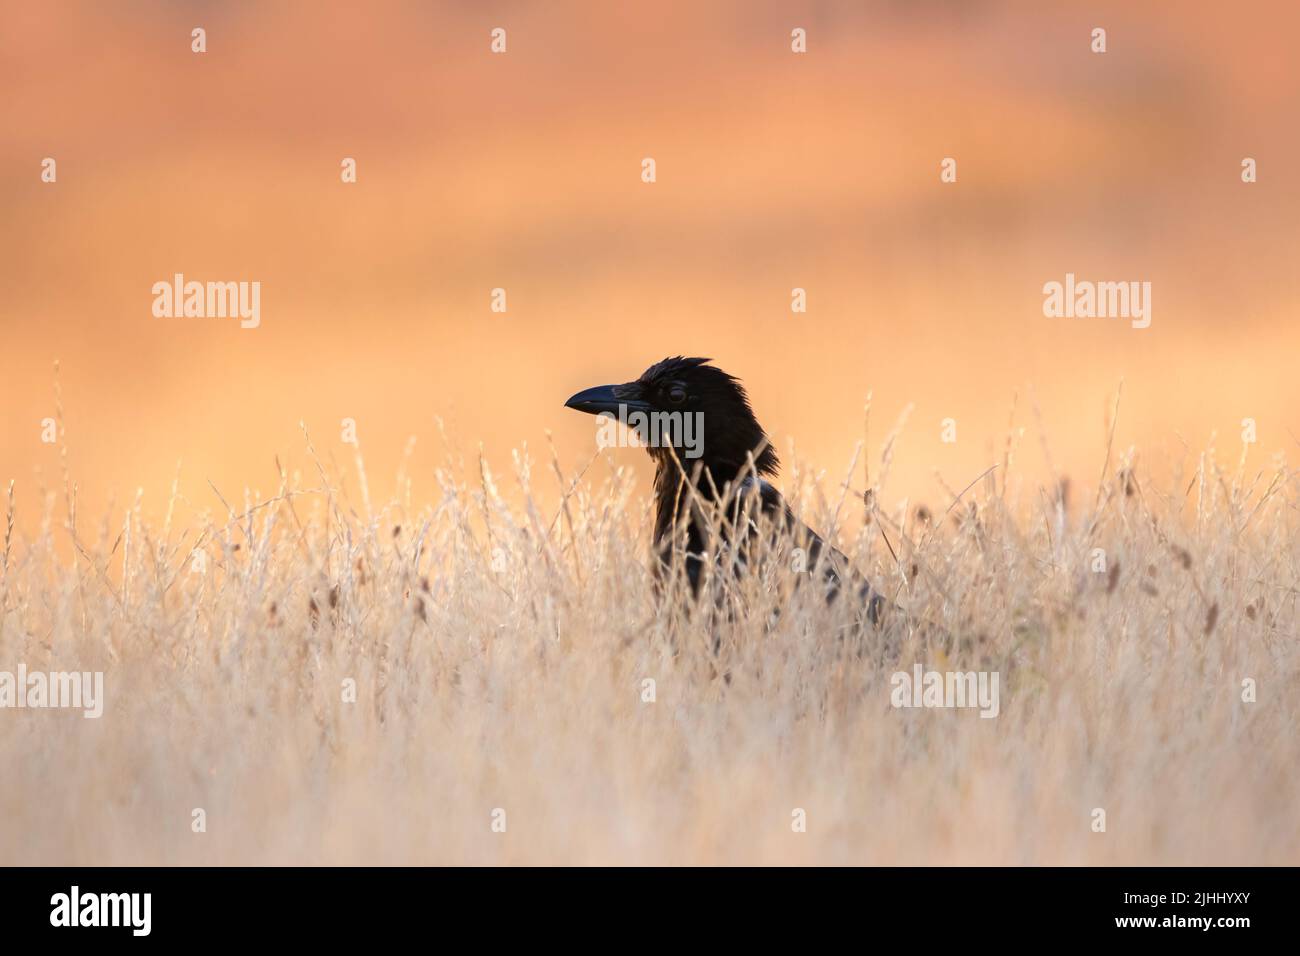 Portrait of a Carrion crow (Corvus corone) on the ground in sunlit grass against sunrise sky Stock Photo